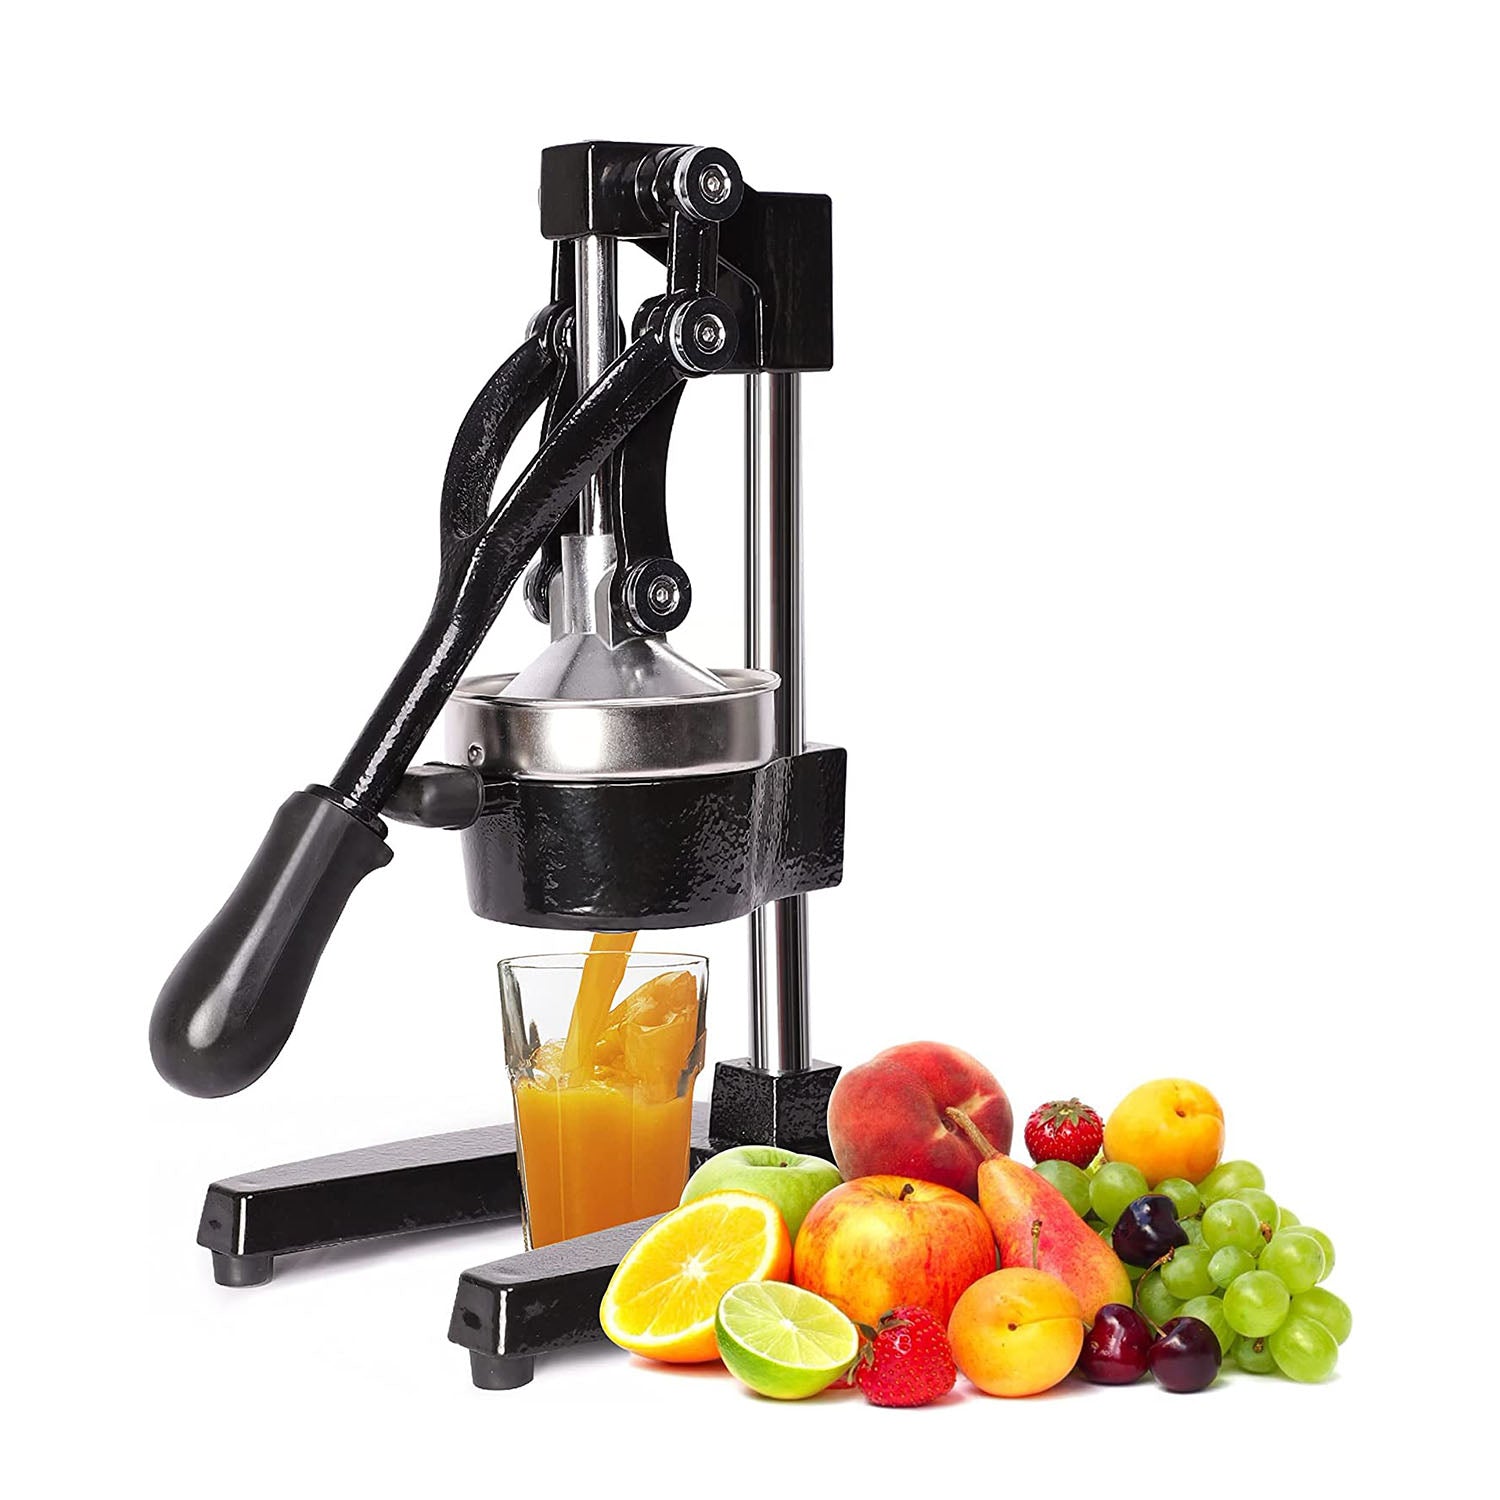 Juicer Labor-saving Manual Commercial Juicer Press Fruit Squeezer with Stable Non-slip Base, Black